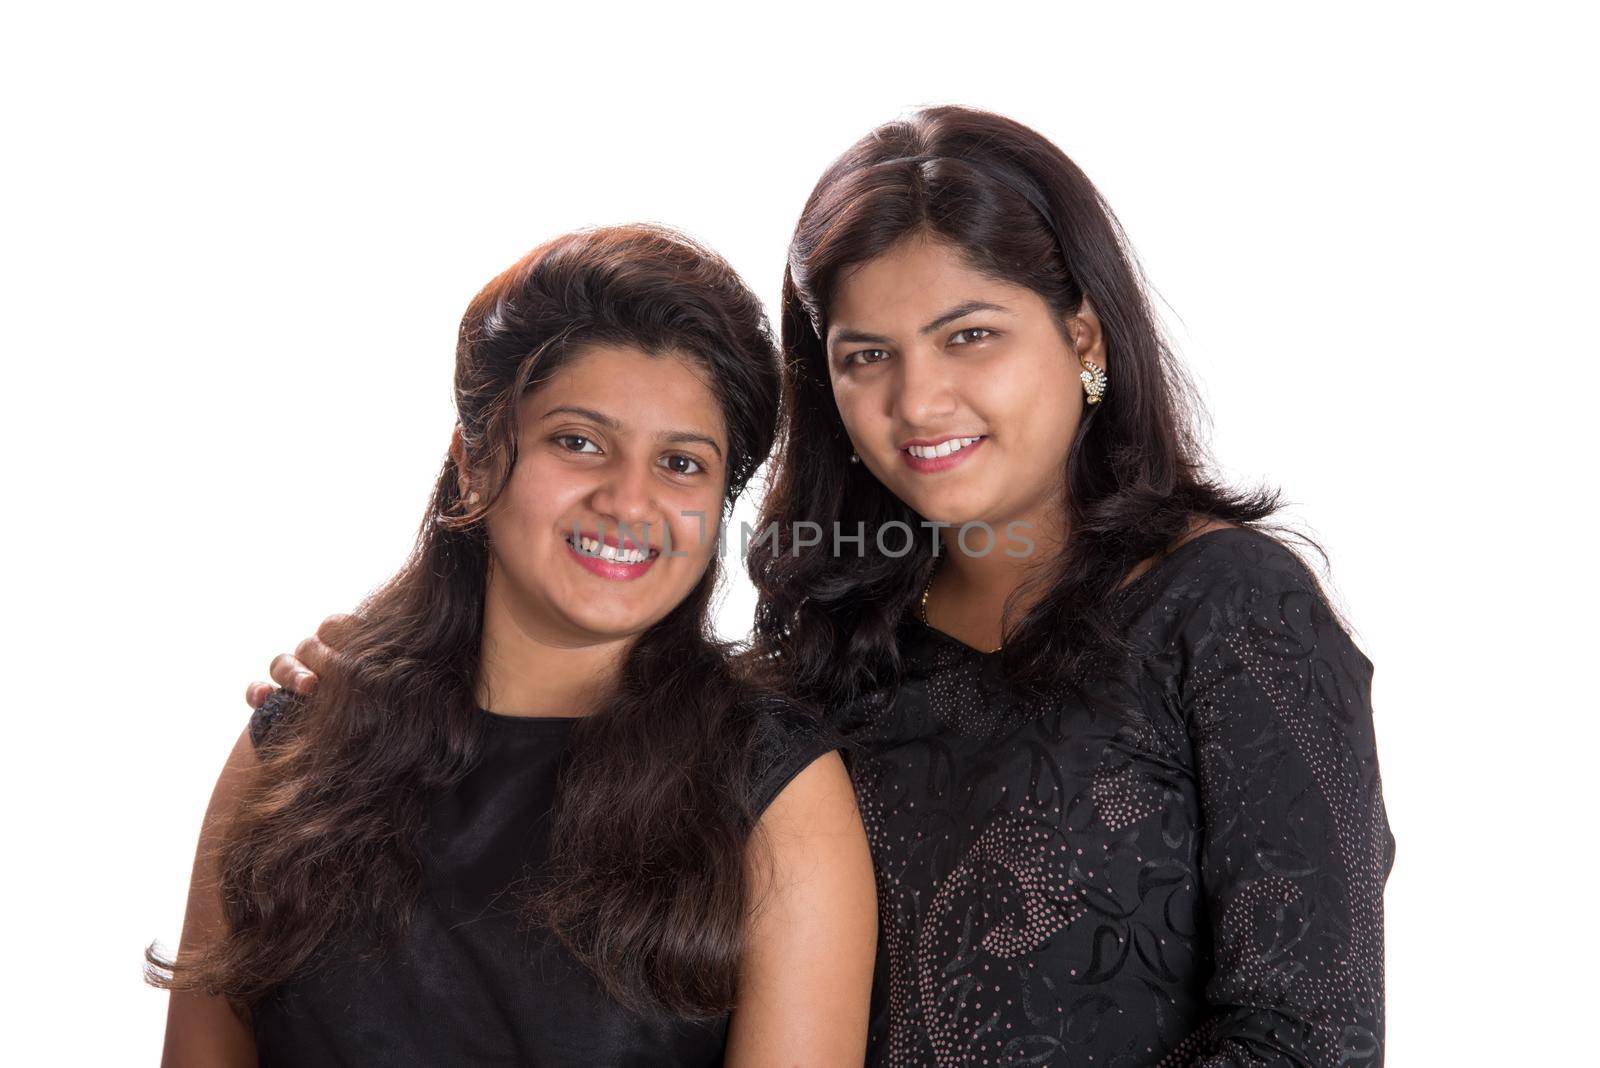 Portrait of happy young girls on a white background